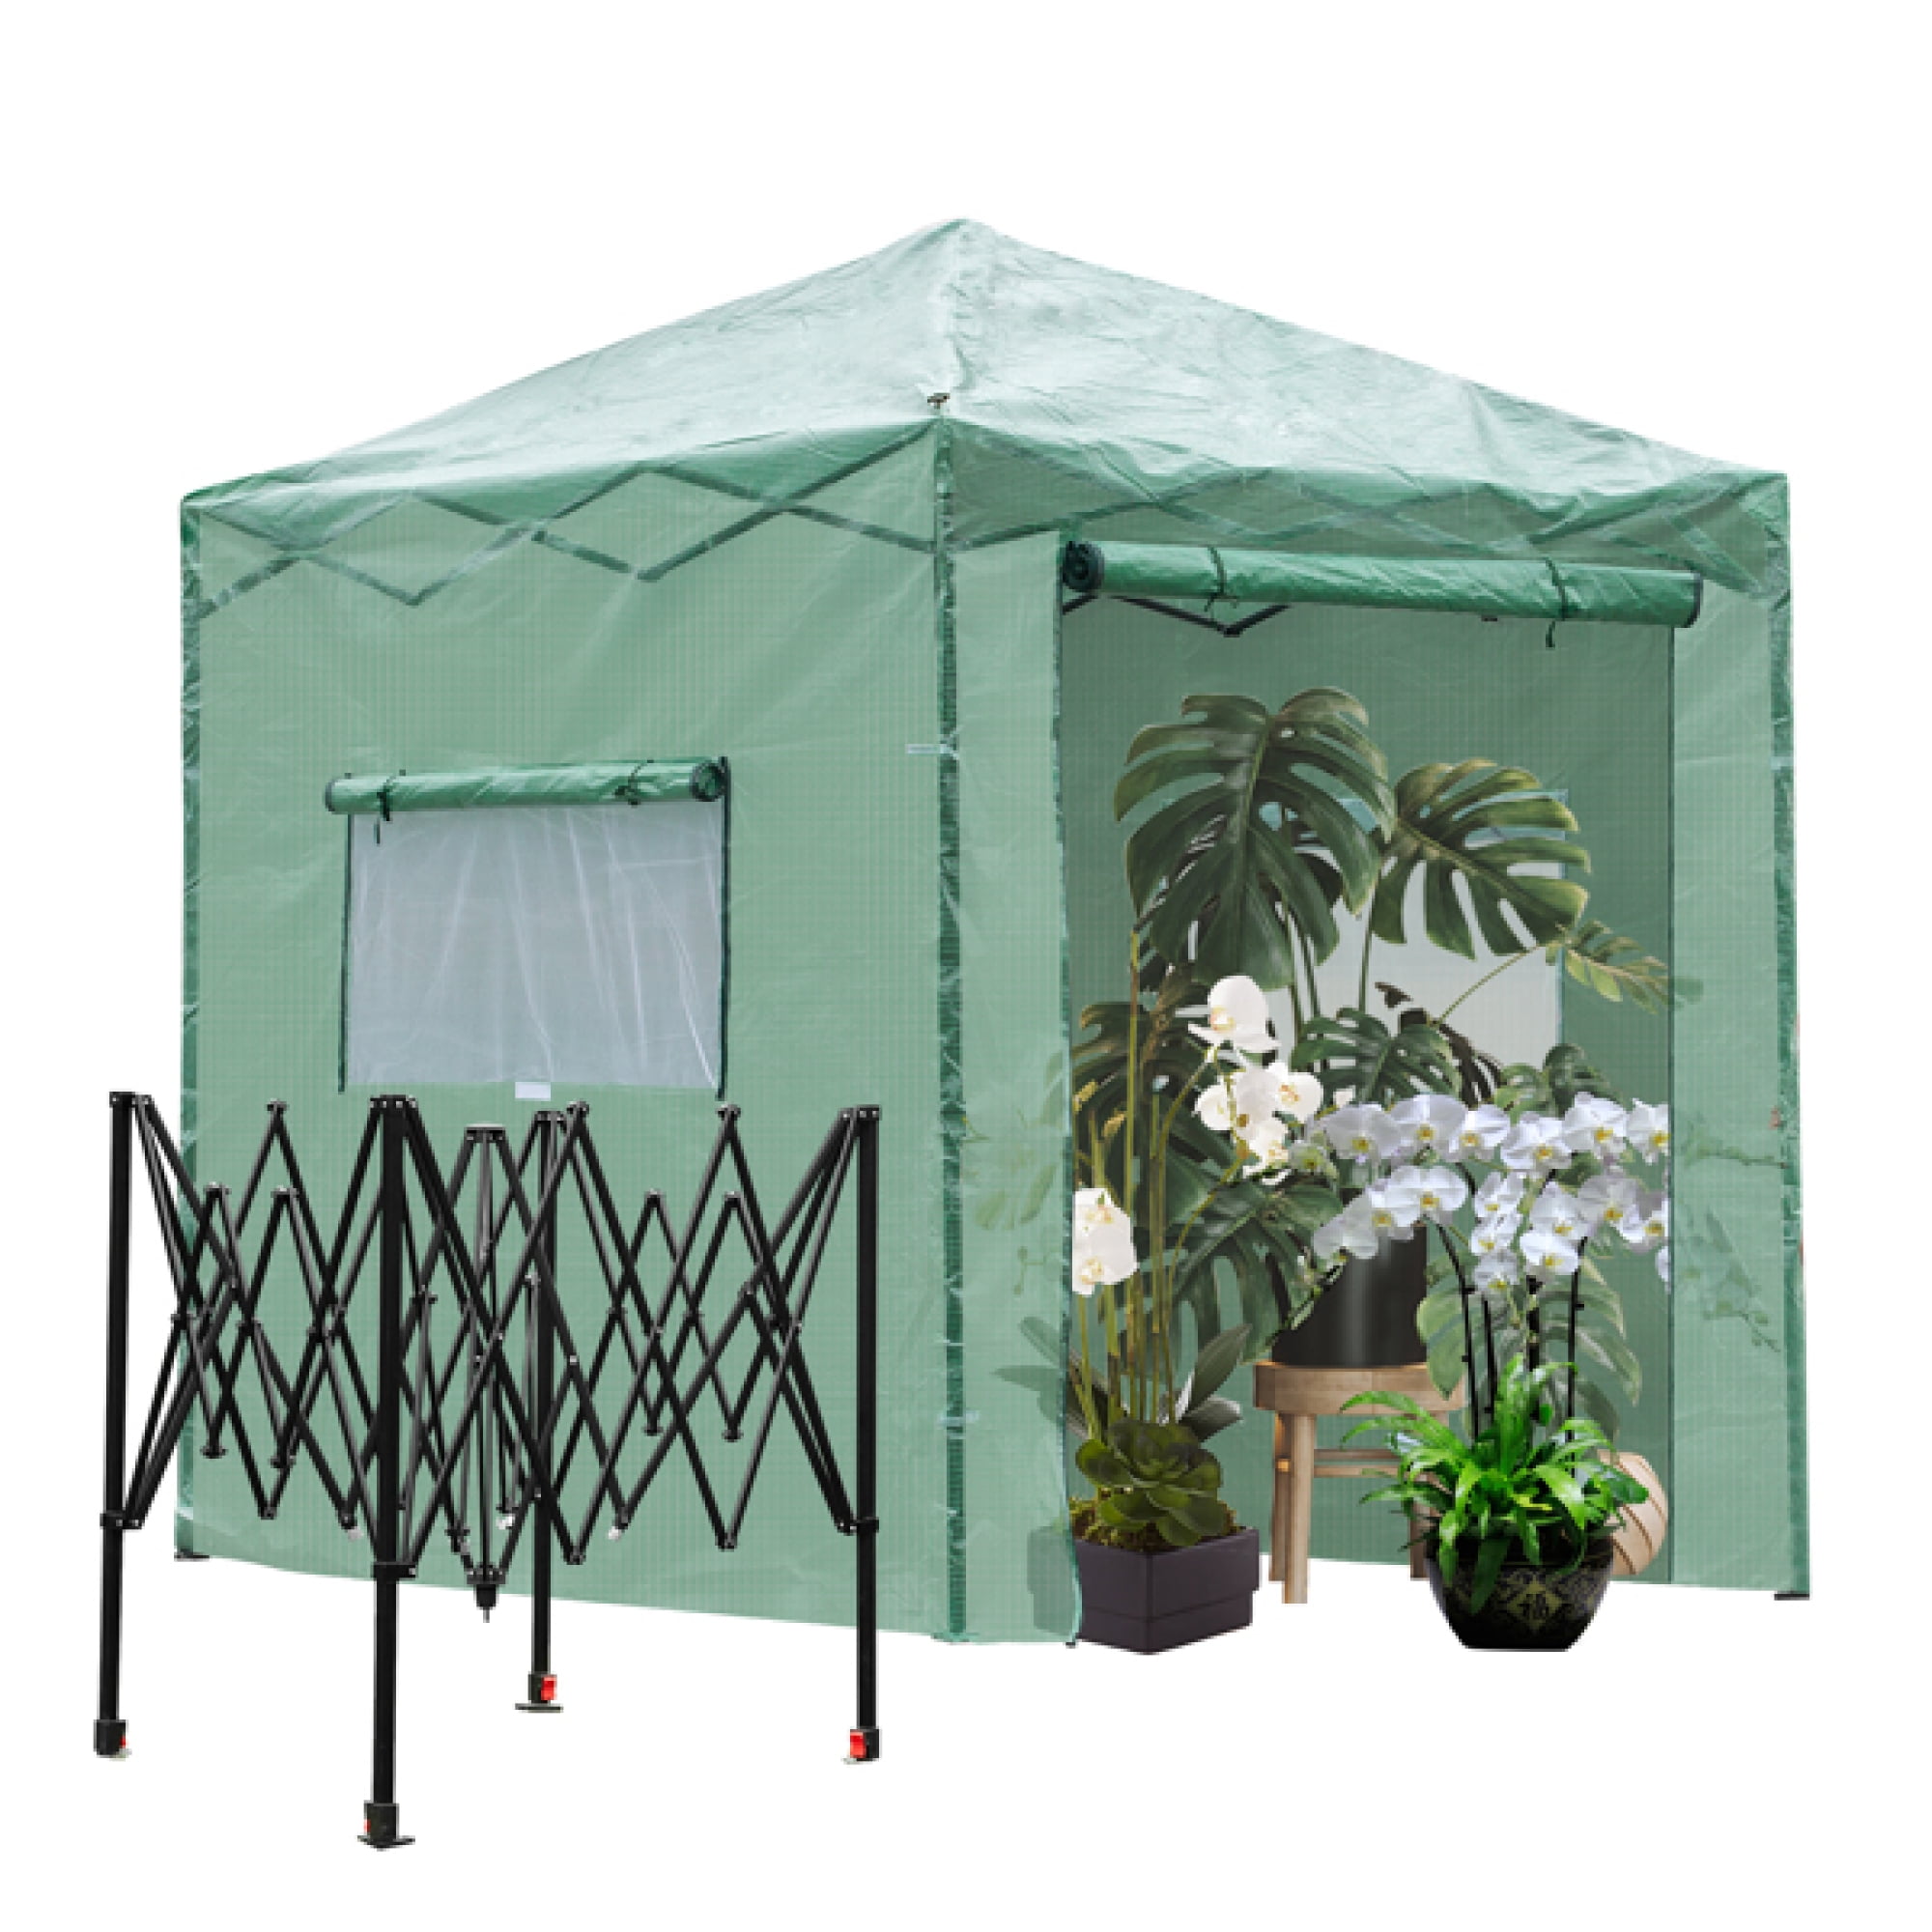 Greenhouse Hanience Walk-in Greenhouse with Anchors and Ropes Green PE Cover 3 Tier 4 Wired Shelves Indoor and Outdoor Greenhouse for Garden/Patio/Backyard/ Balcony 